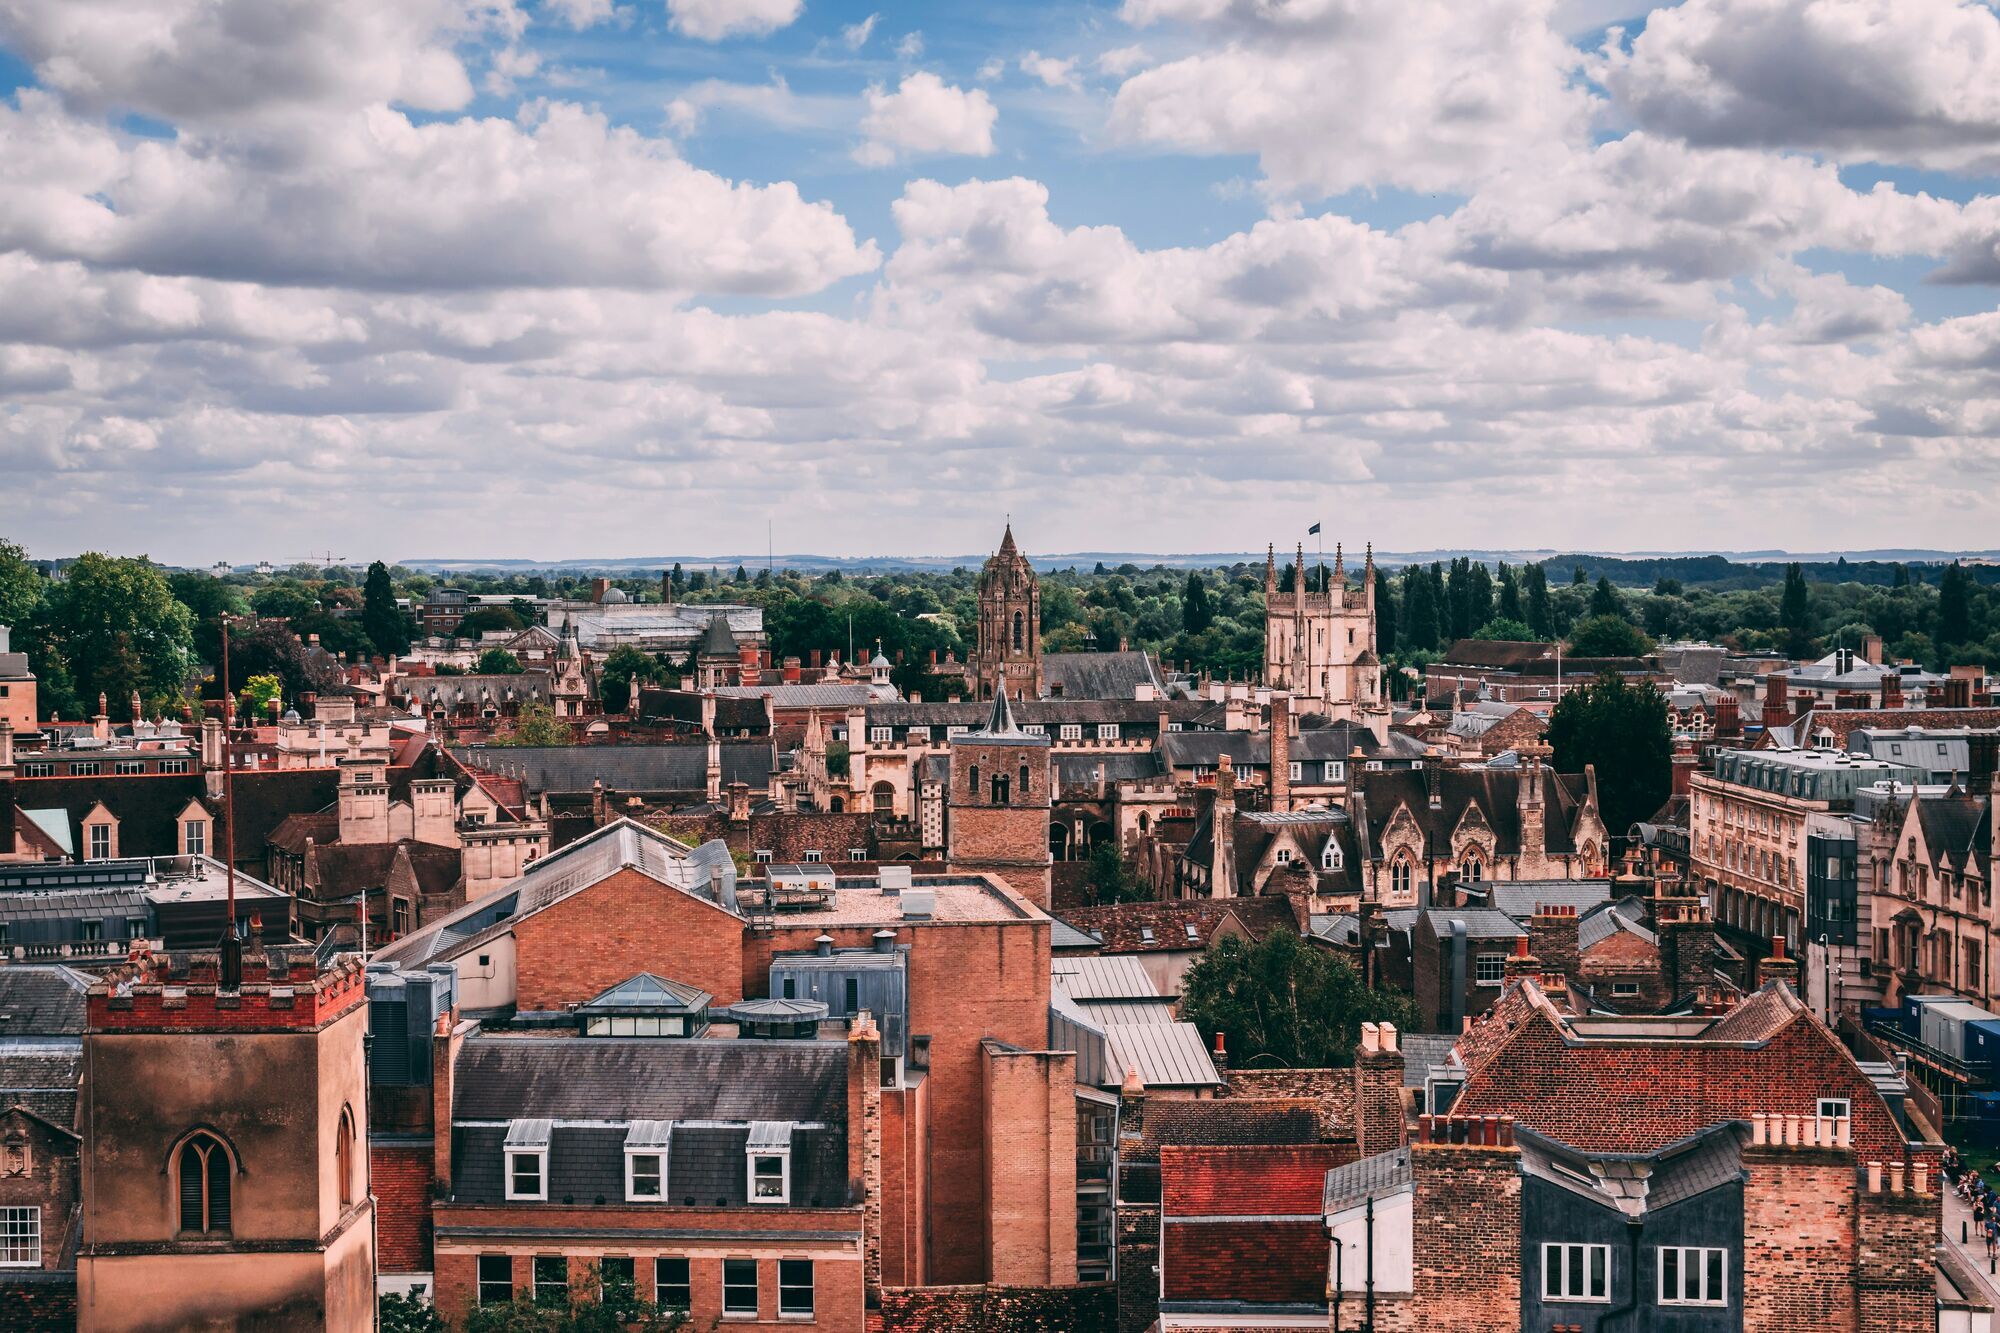 Cambridge may introduce an additional tourist tax for hotel guests in 2025